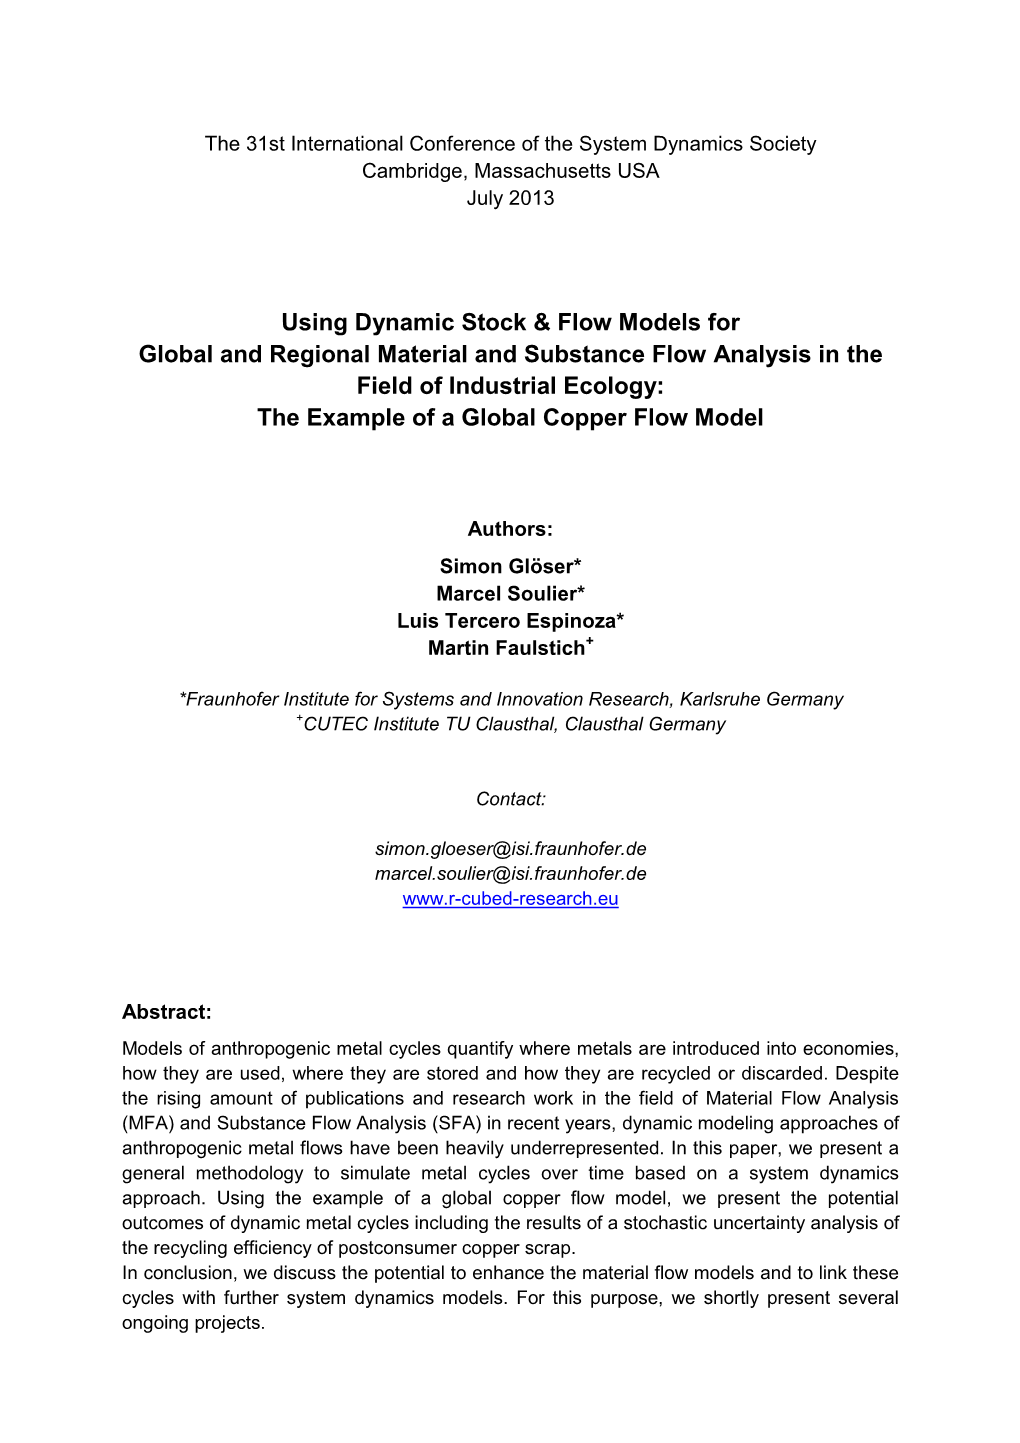 Using Dynamic Stock & Flow Models for Global and Regional Material and Substance Flow Analysis in the Field of Industrial E